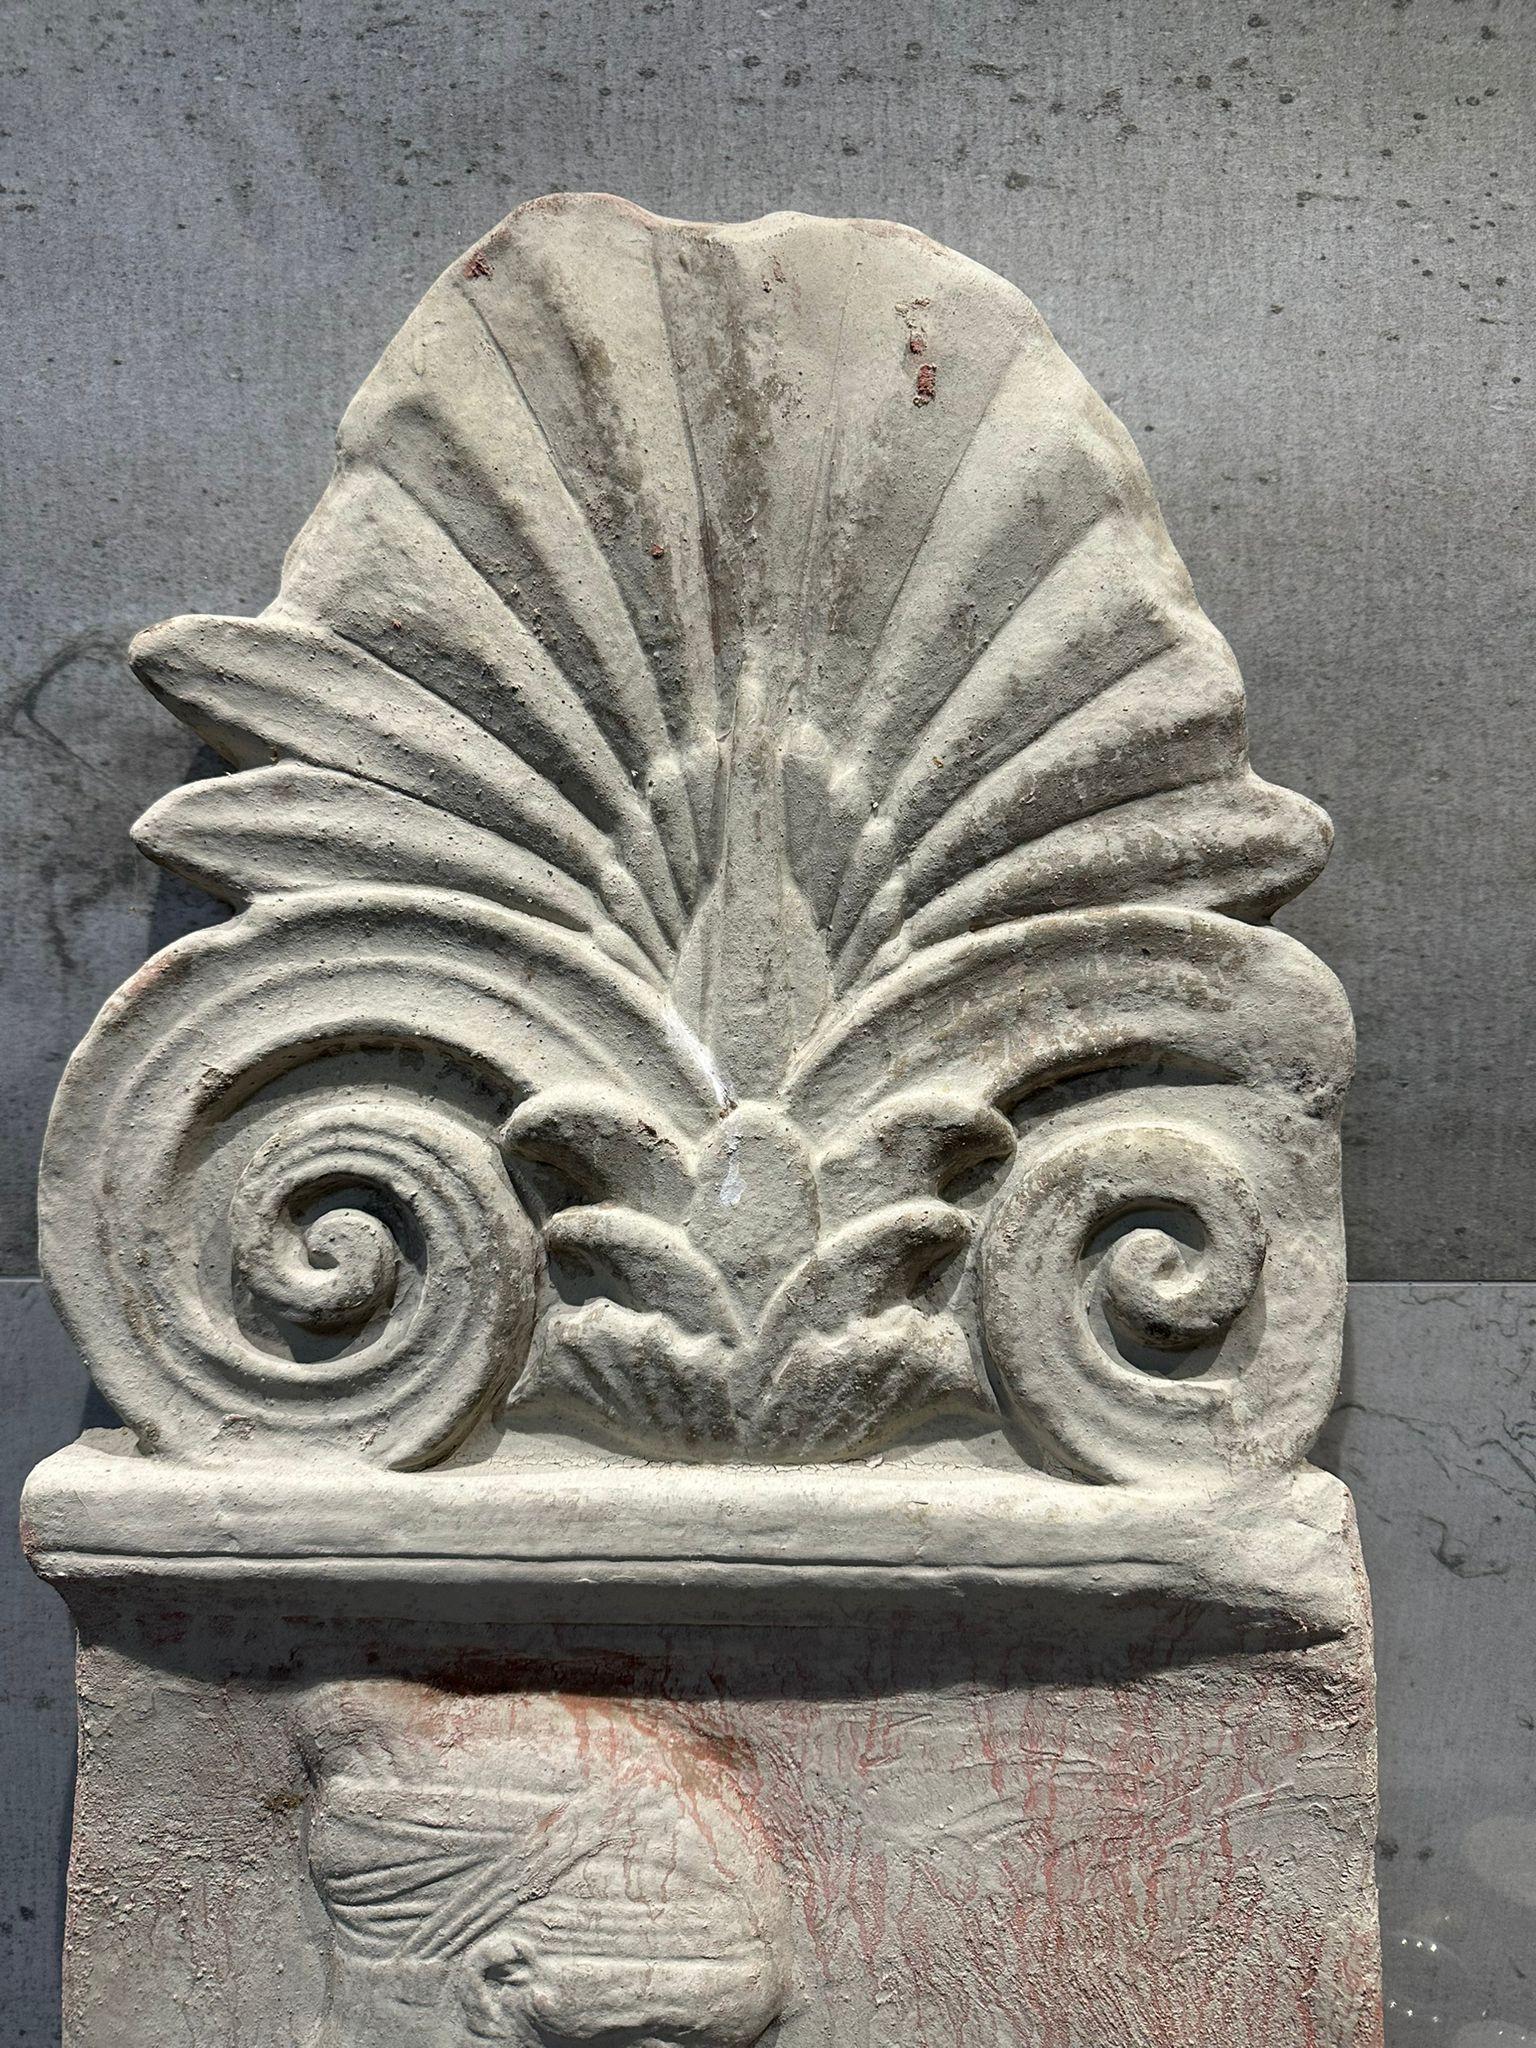 Large Roman terracotta antefix early 20th century
Italy
Measures: height 83cm
width 39cms
thickness 4cm
weight 8kg
material terracotta
Good conditions.